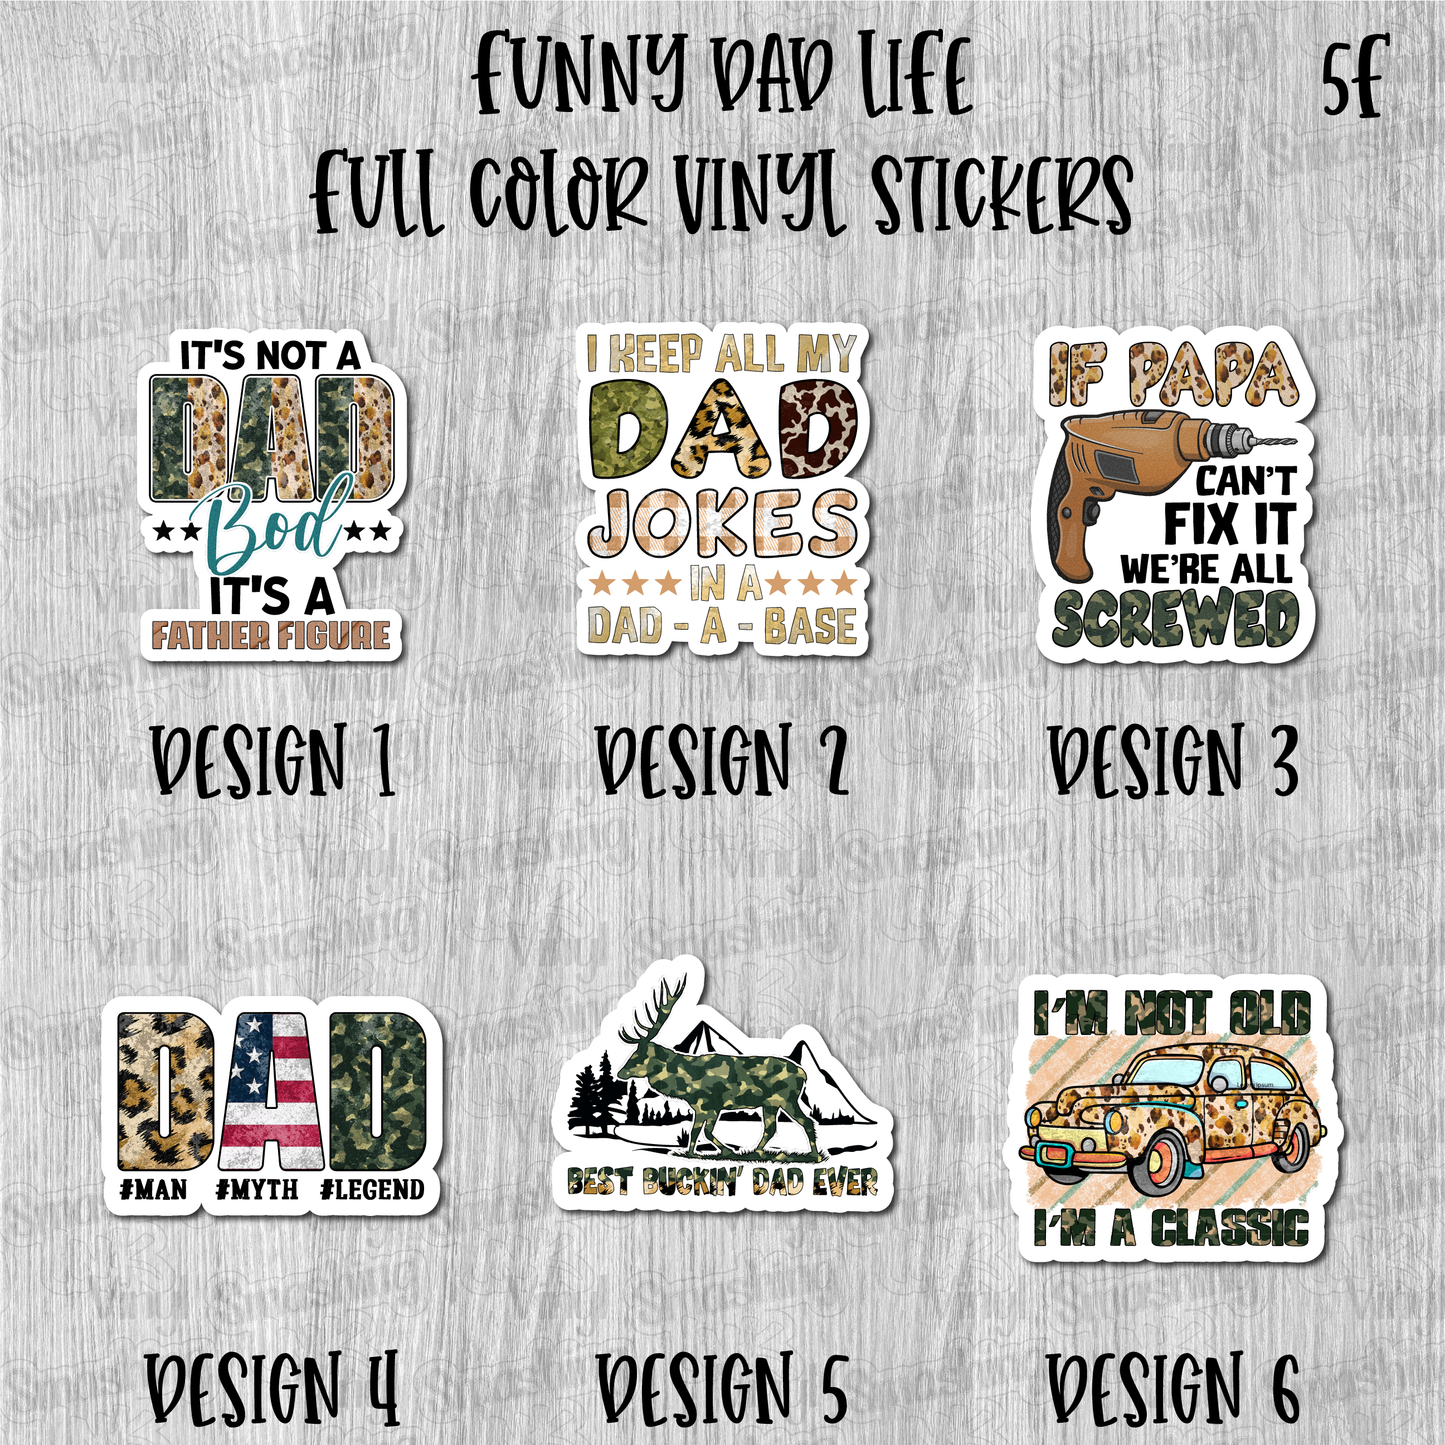 Funny Dad Life - Full Color Vinyl Stickers (SHIPS IN 3-7 BUS DAYS)